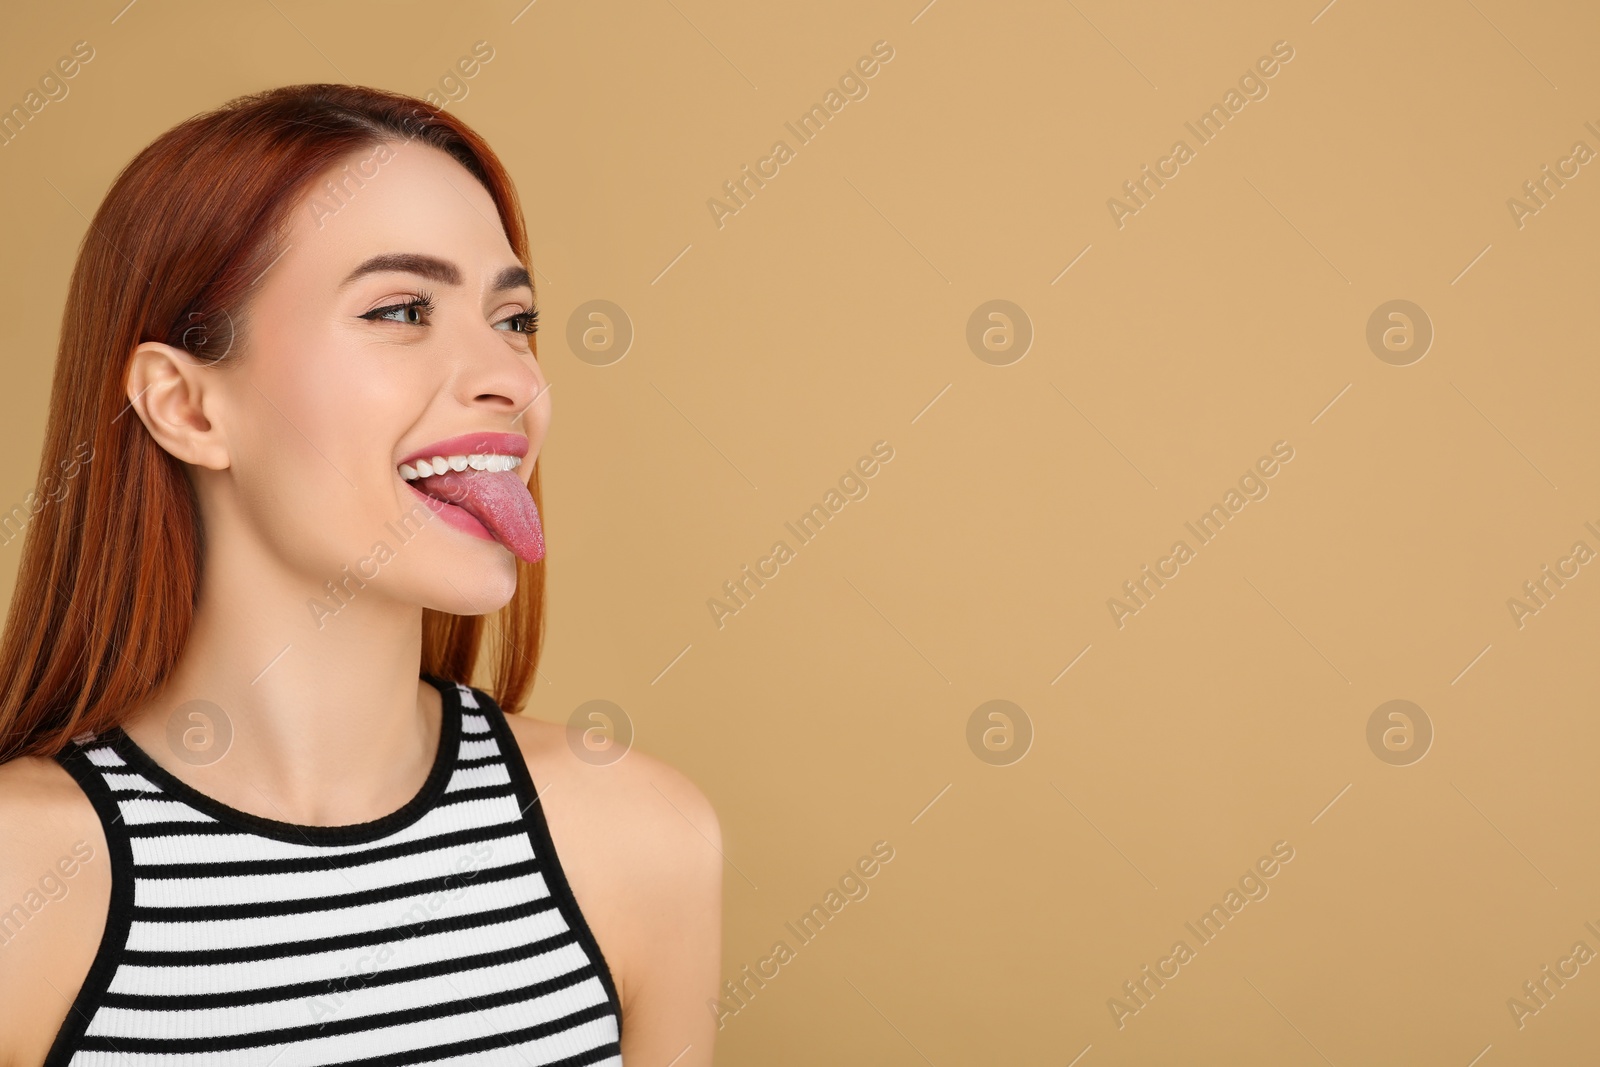 Photo of Happy woman showing her tongue on beige background. Space for text